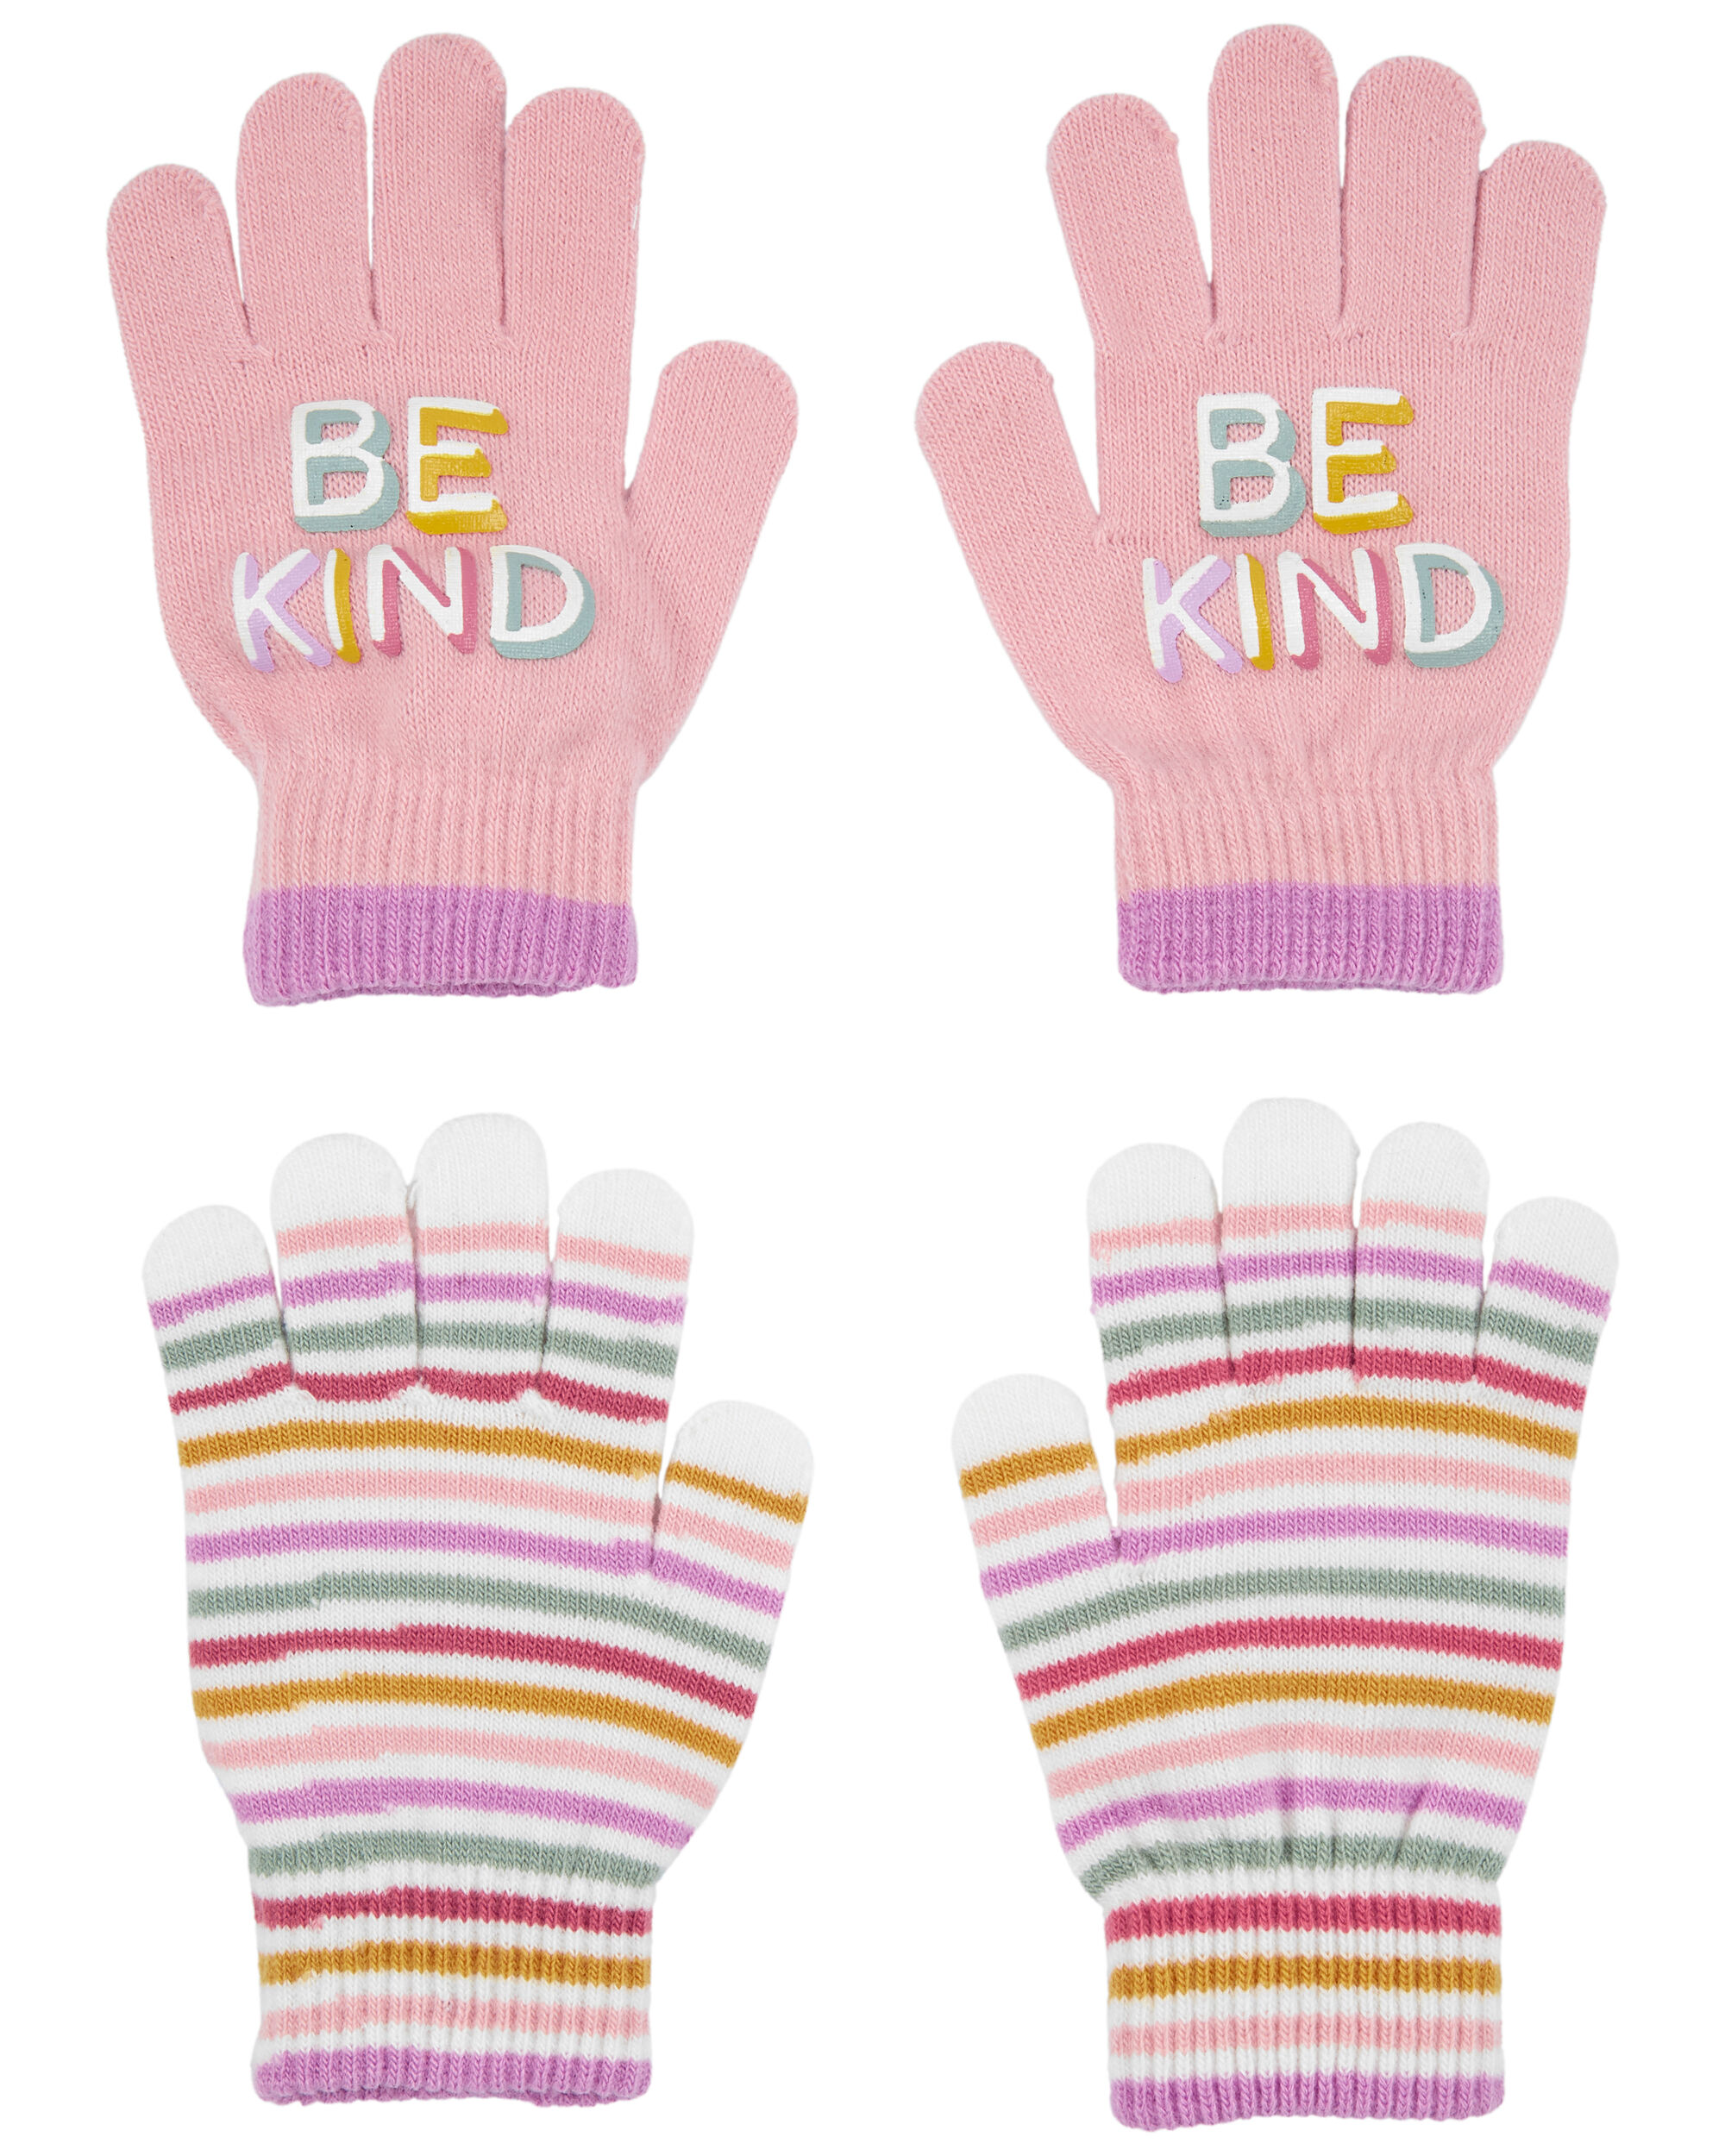 KIDS FASHION Accessories discount 92% Wed'ze gloves Pink Single 